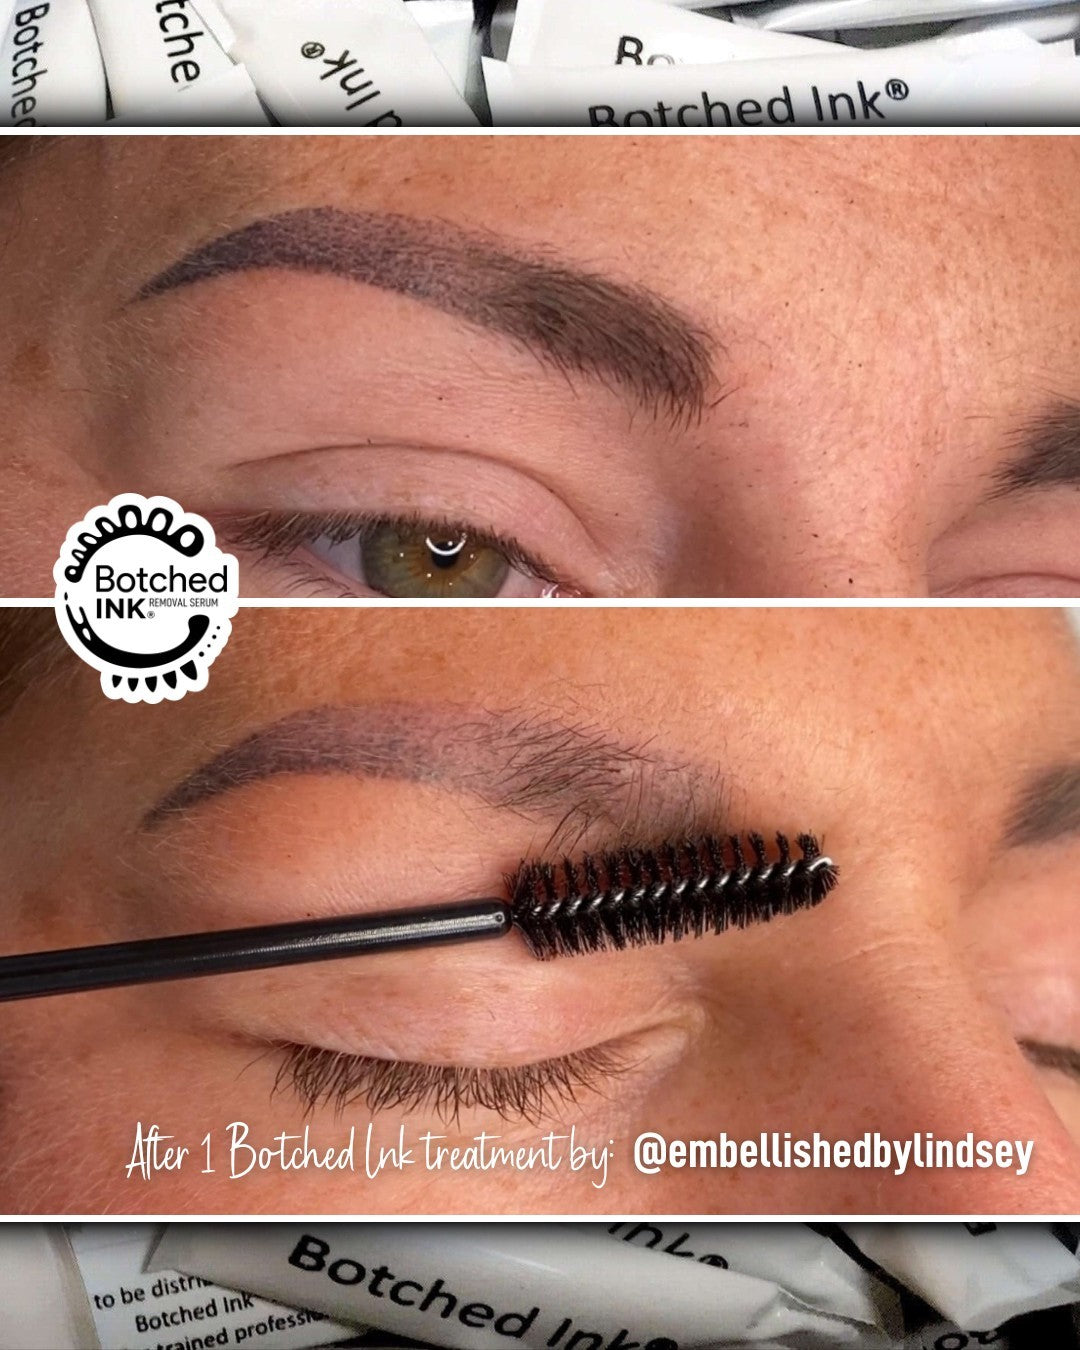 Botched Ink online saline removal training microblading PMU eyebrow tattoo removal